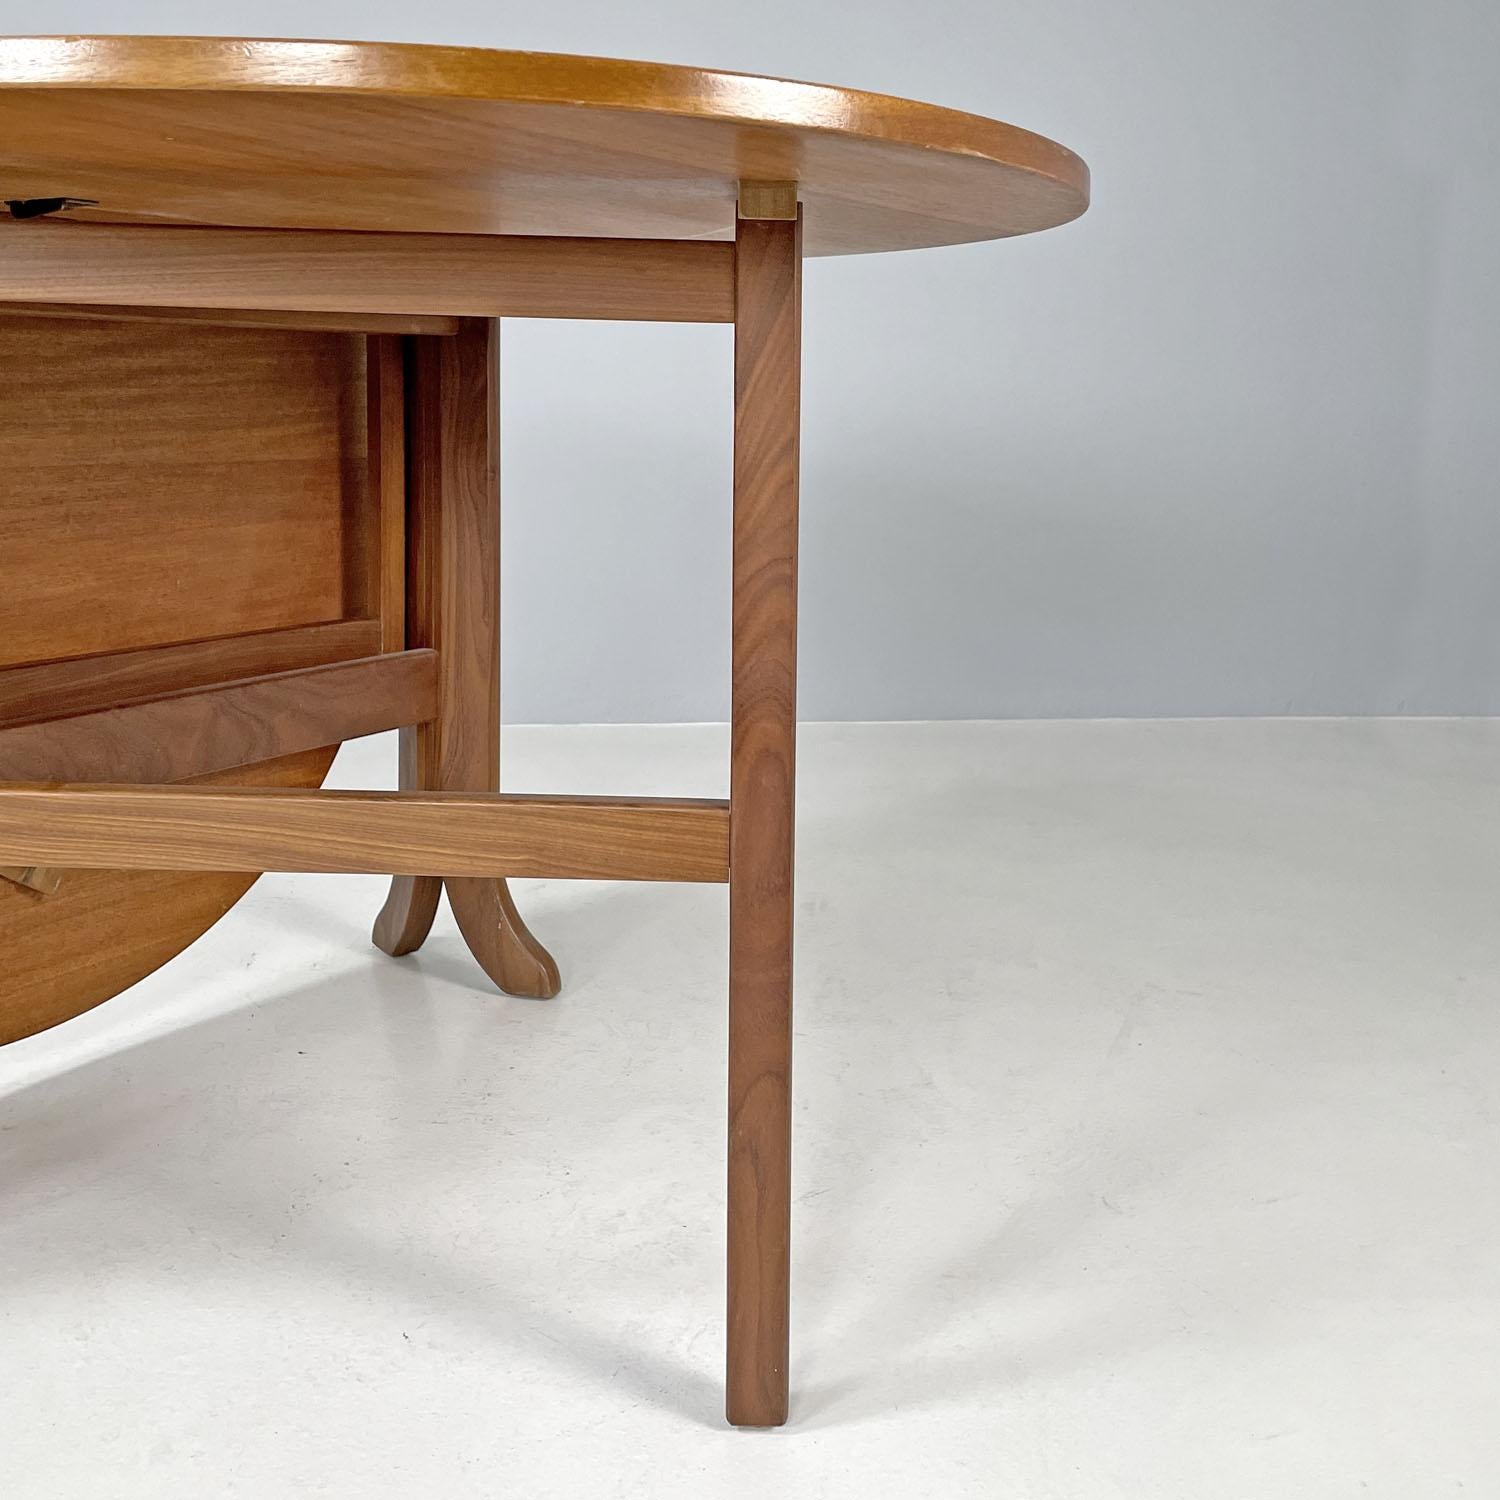 English mid-century modern wooden dining table with flap doors, 1960s For Sale 9